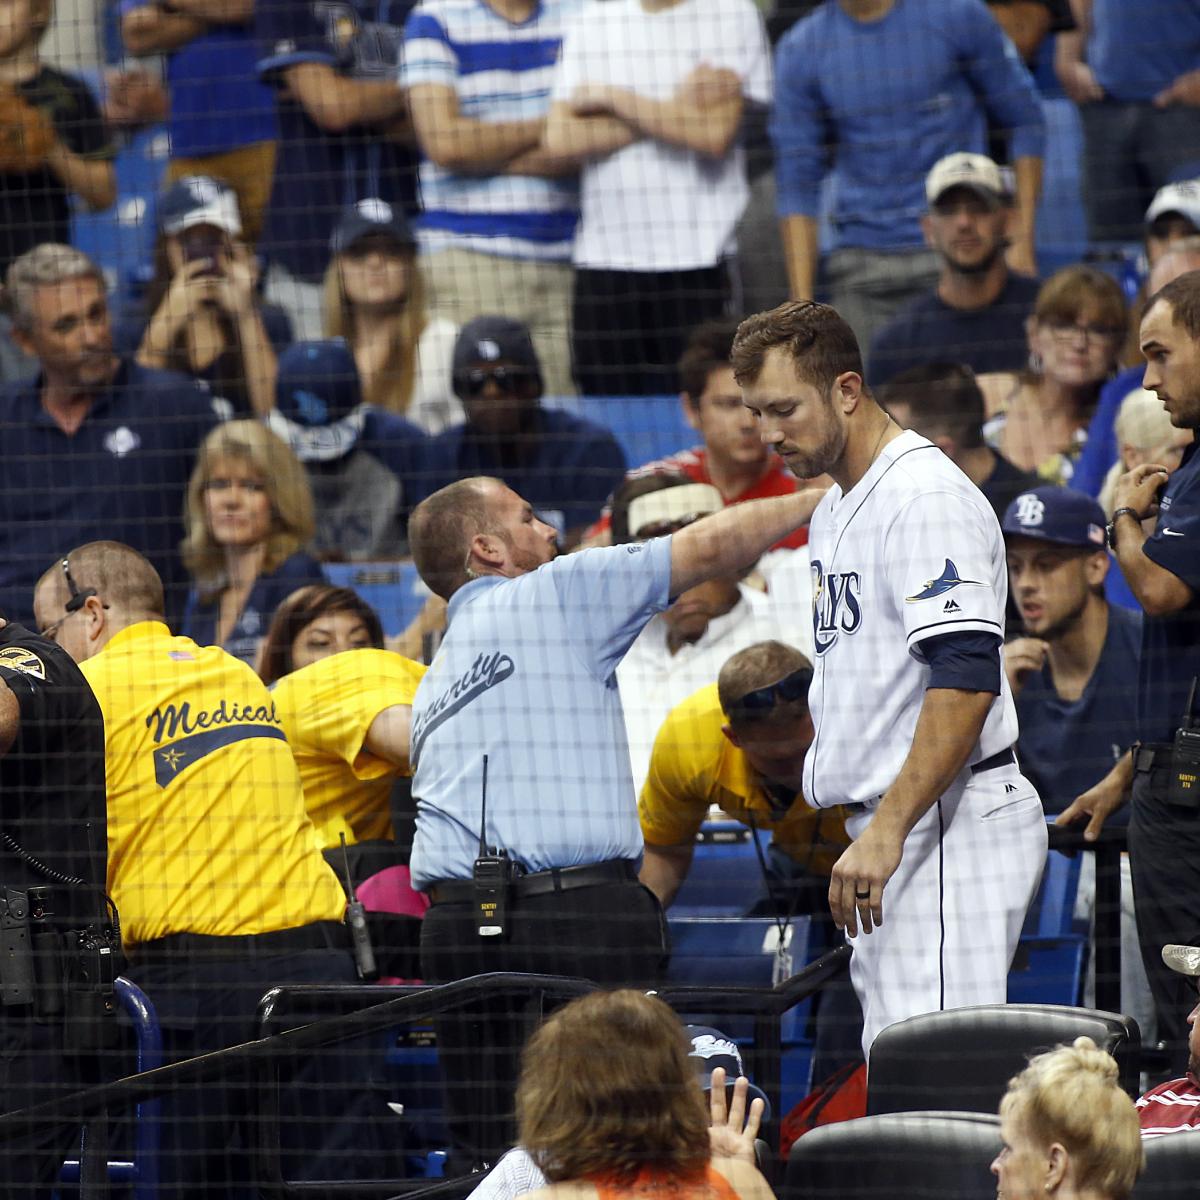 Instant Replay: Rays OF Hits Home Run In Front Of Fan Battling Cancer